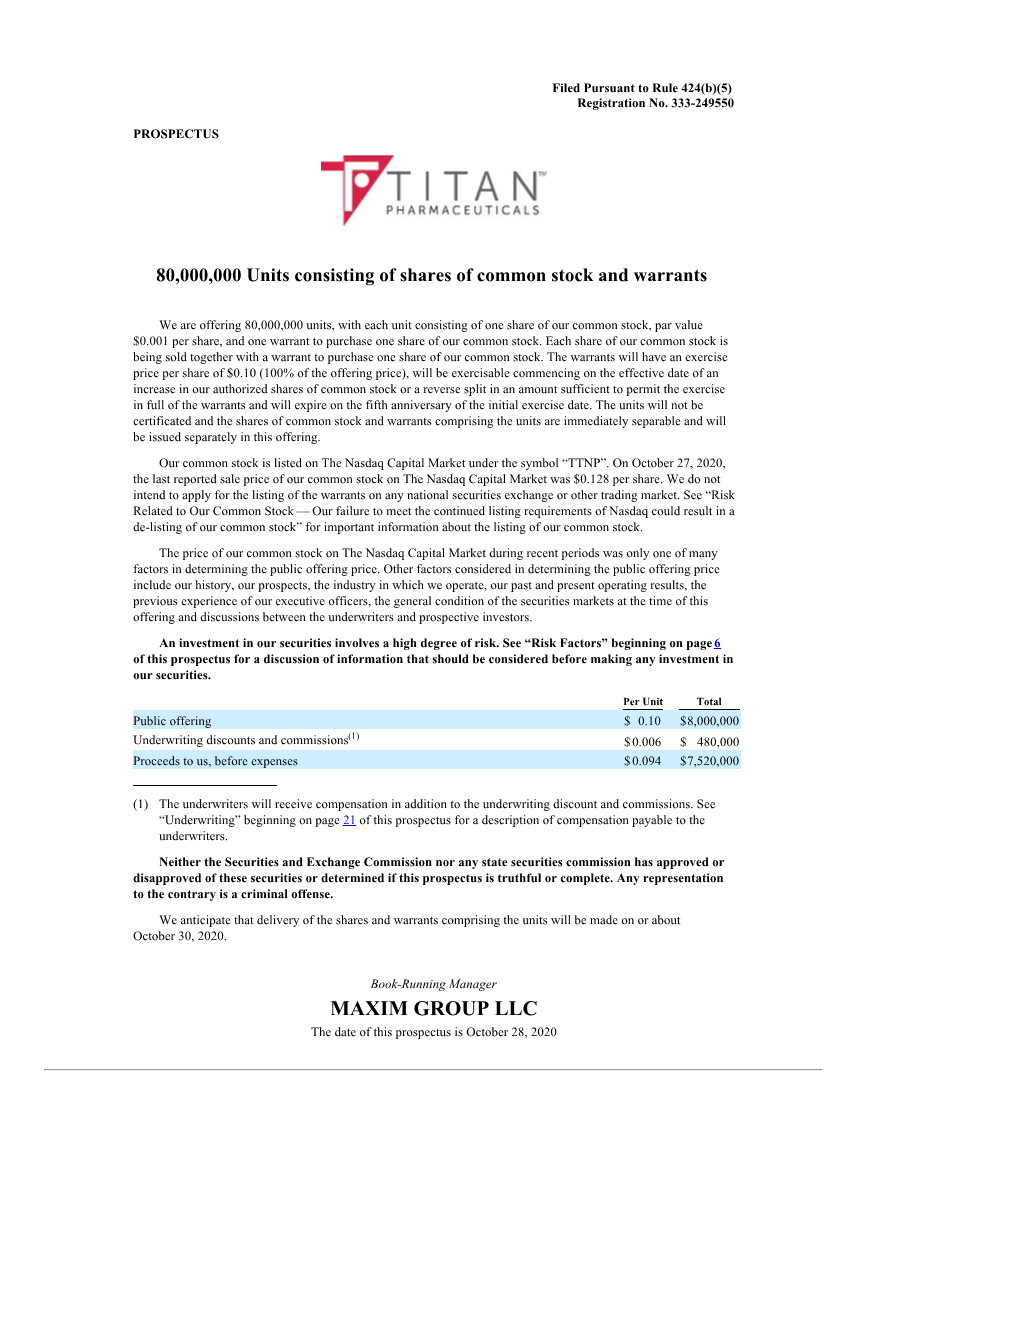 MAXIM GROUP LLC the Date of This Prospectus Is October 28, 2020